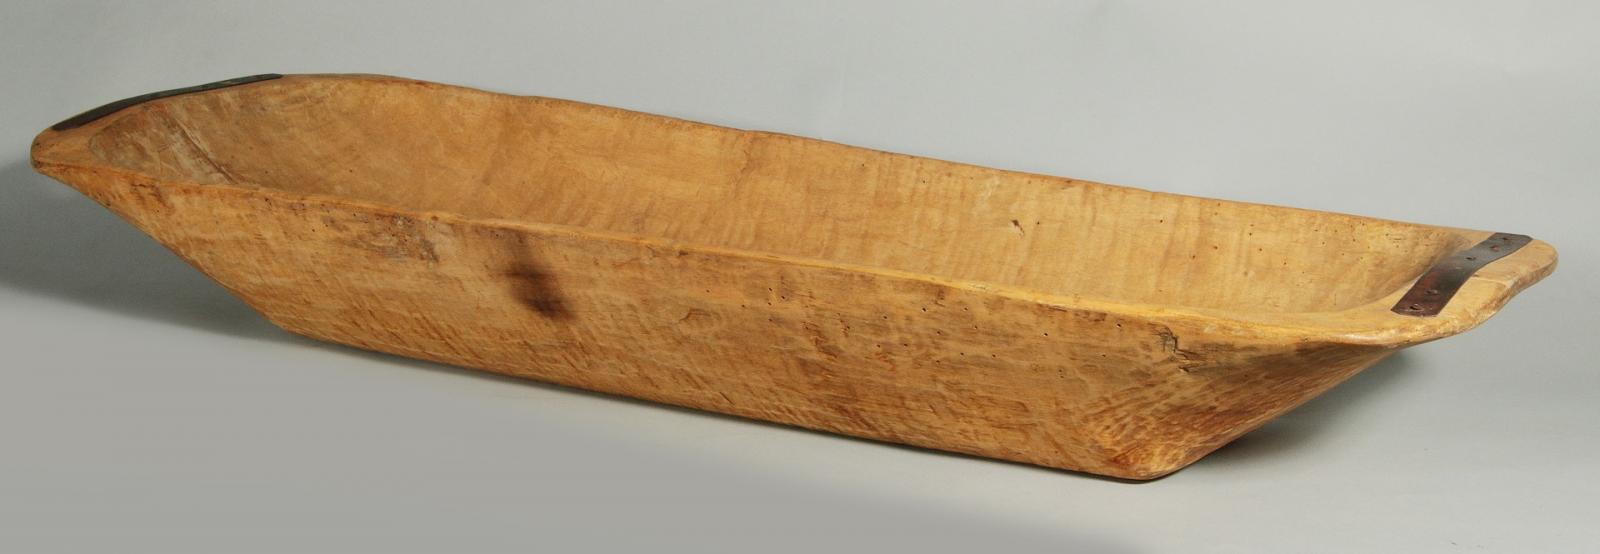 A LARGE, LONG PRIMITIVE HEWN WOOD TRENCHER BOWL